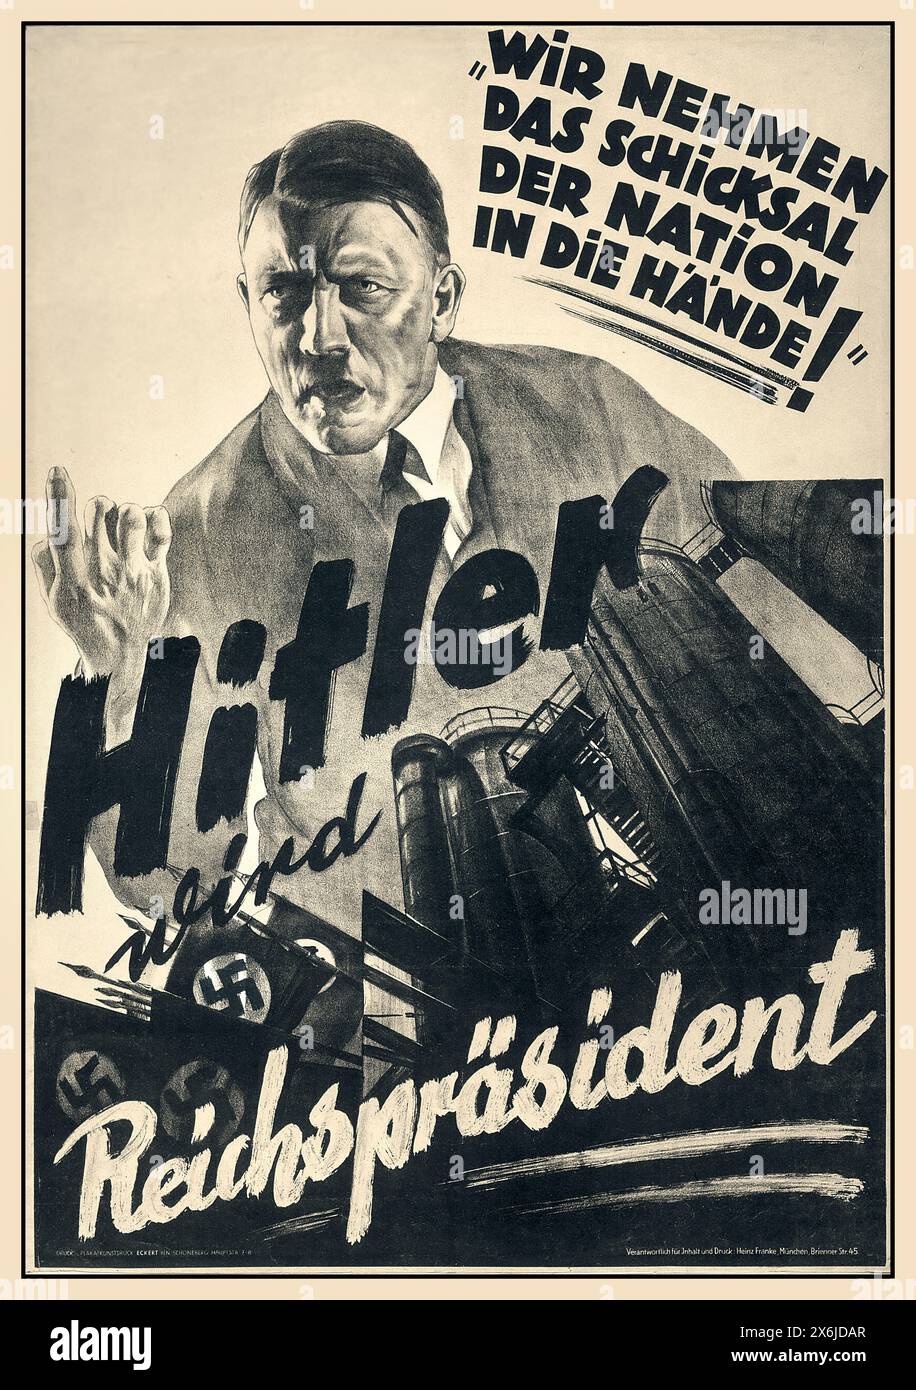 ADOLF HITLER NSDAP Pre-war election 1930's German Propaganda Poster with Adolf Hitler as 'Reichsprasident' stating 'we take the fate of the nation in our hand' Nazi Germany Stock Photo